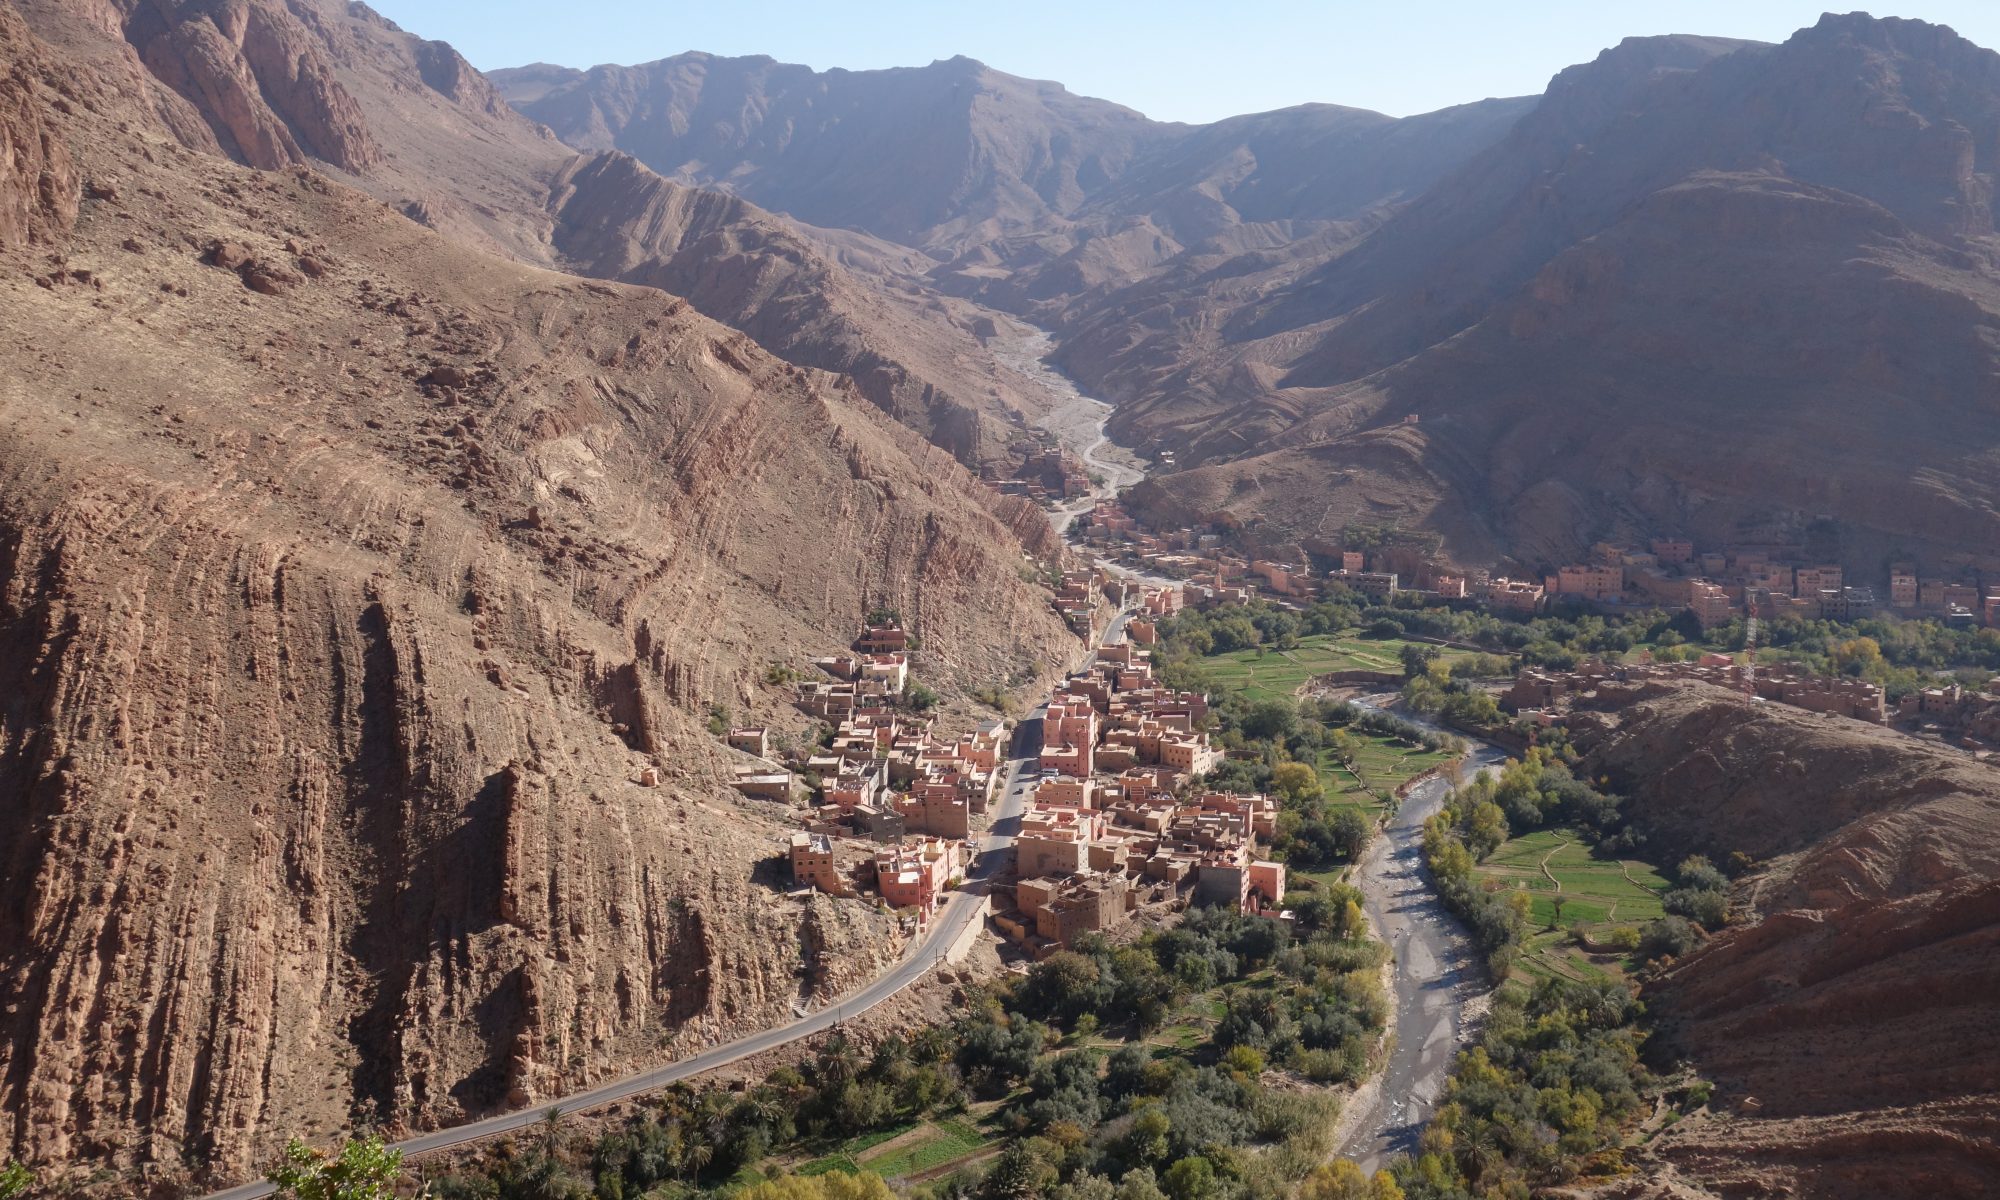 Looking down on the village just outside the Todra Gorge from the top of a climb.